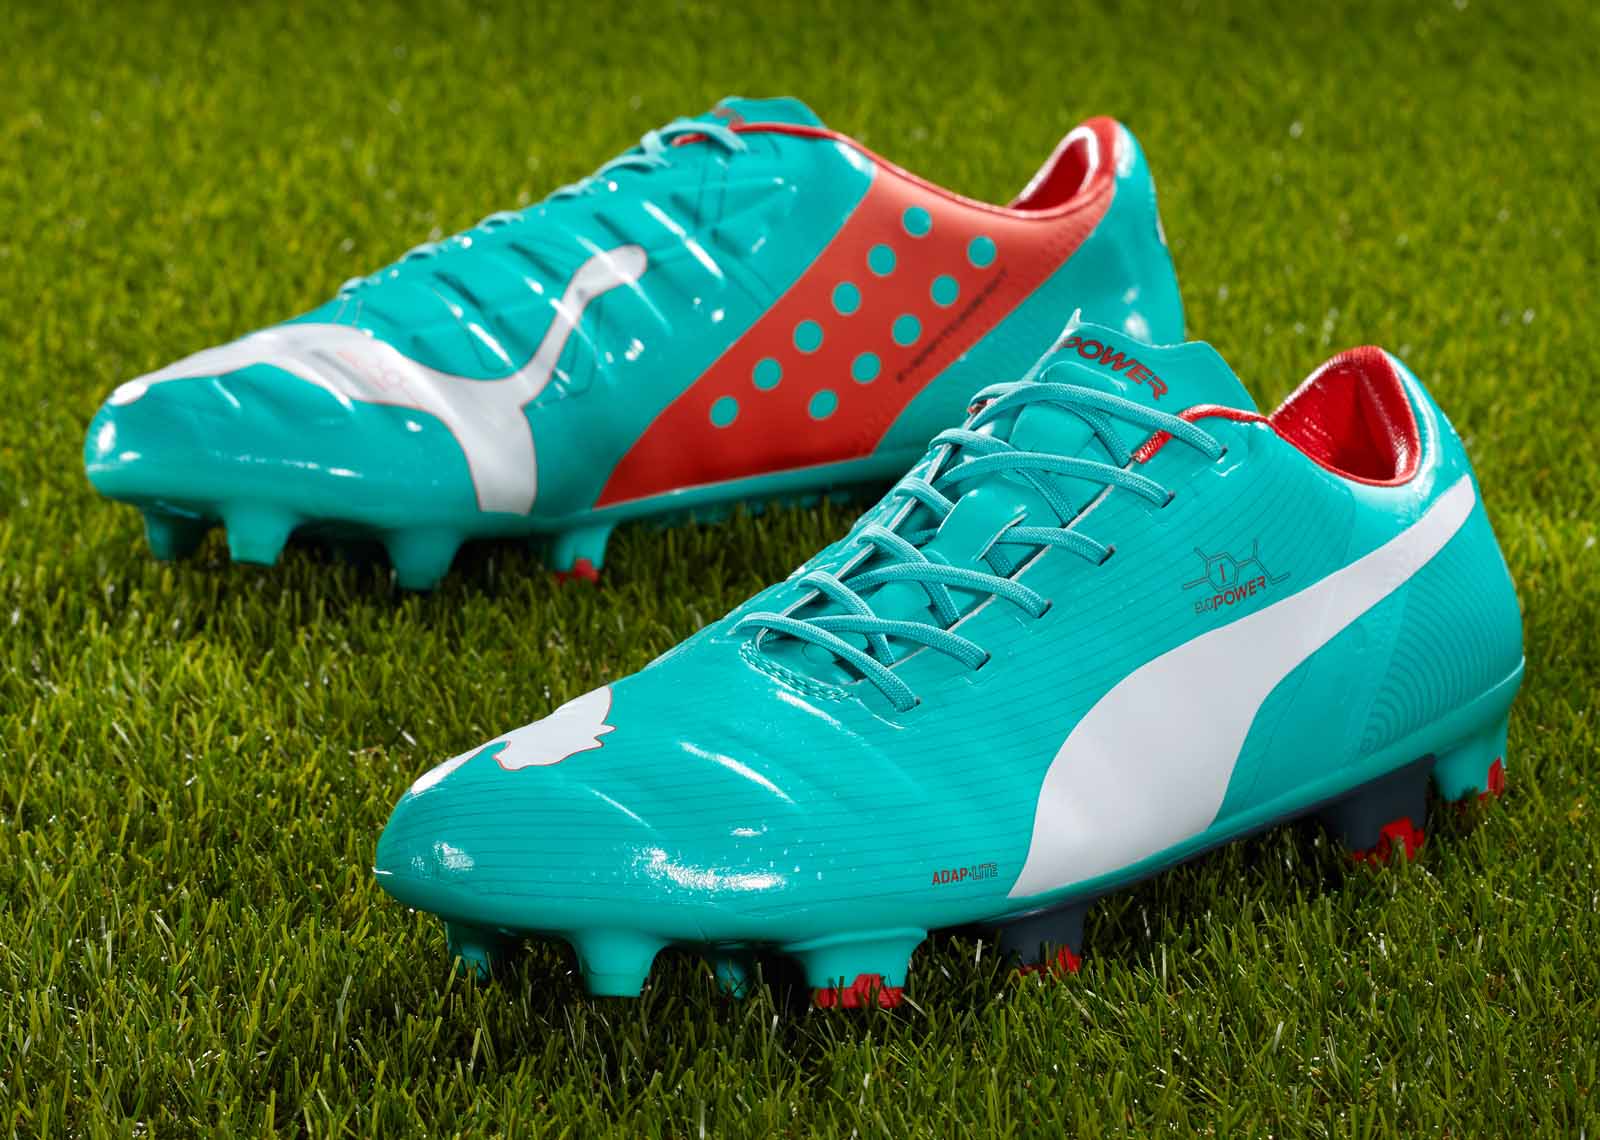 Turquoise Puma evoPOWER 14-15 Boot Released - Footy Headlines